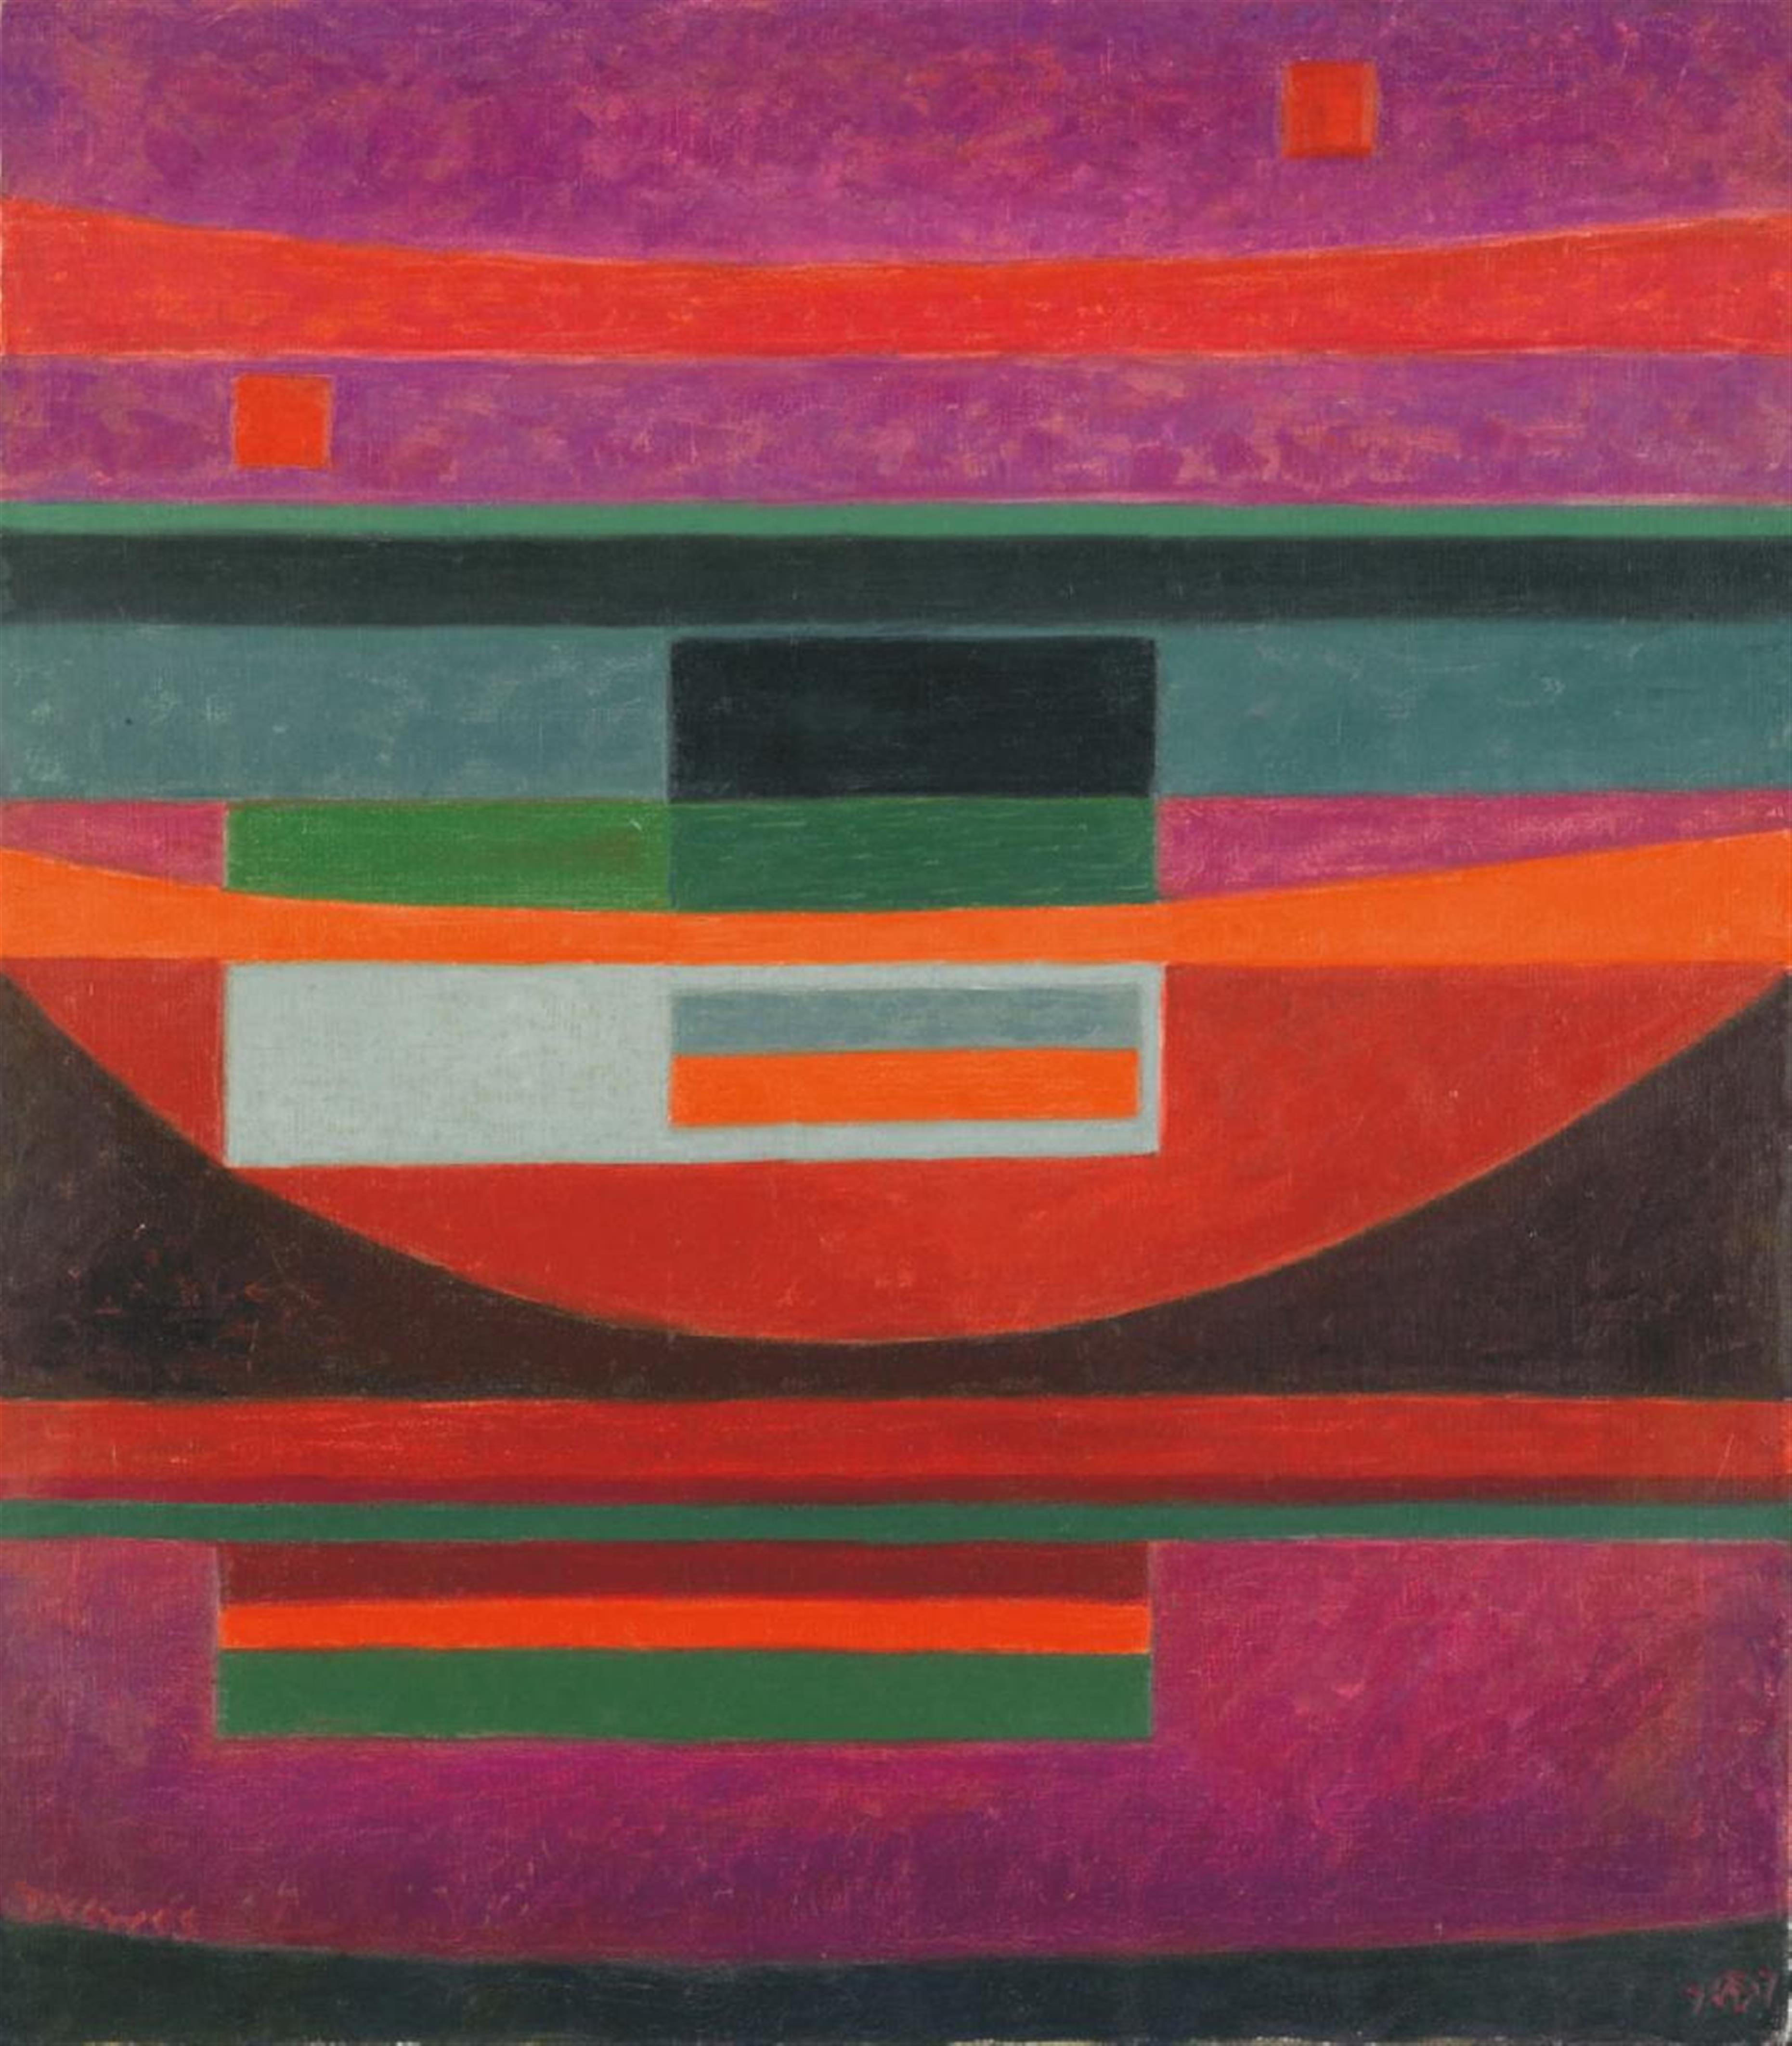 Werner Drewes - Saturation in Red (Erinnerung an Utah) - image-1